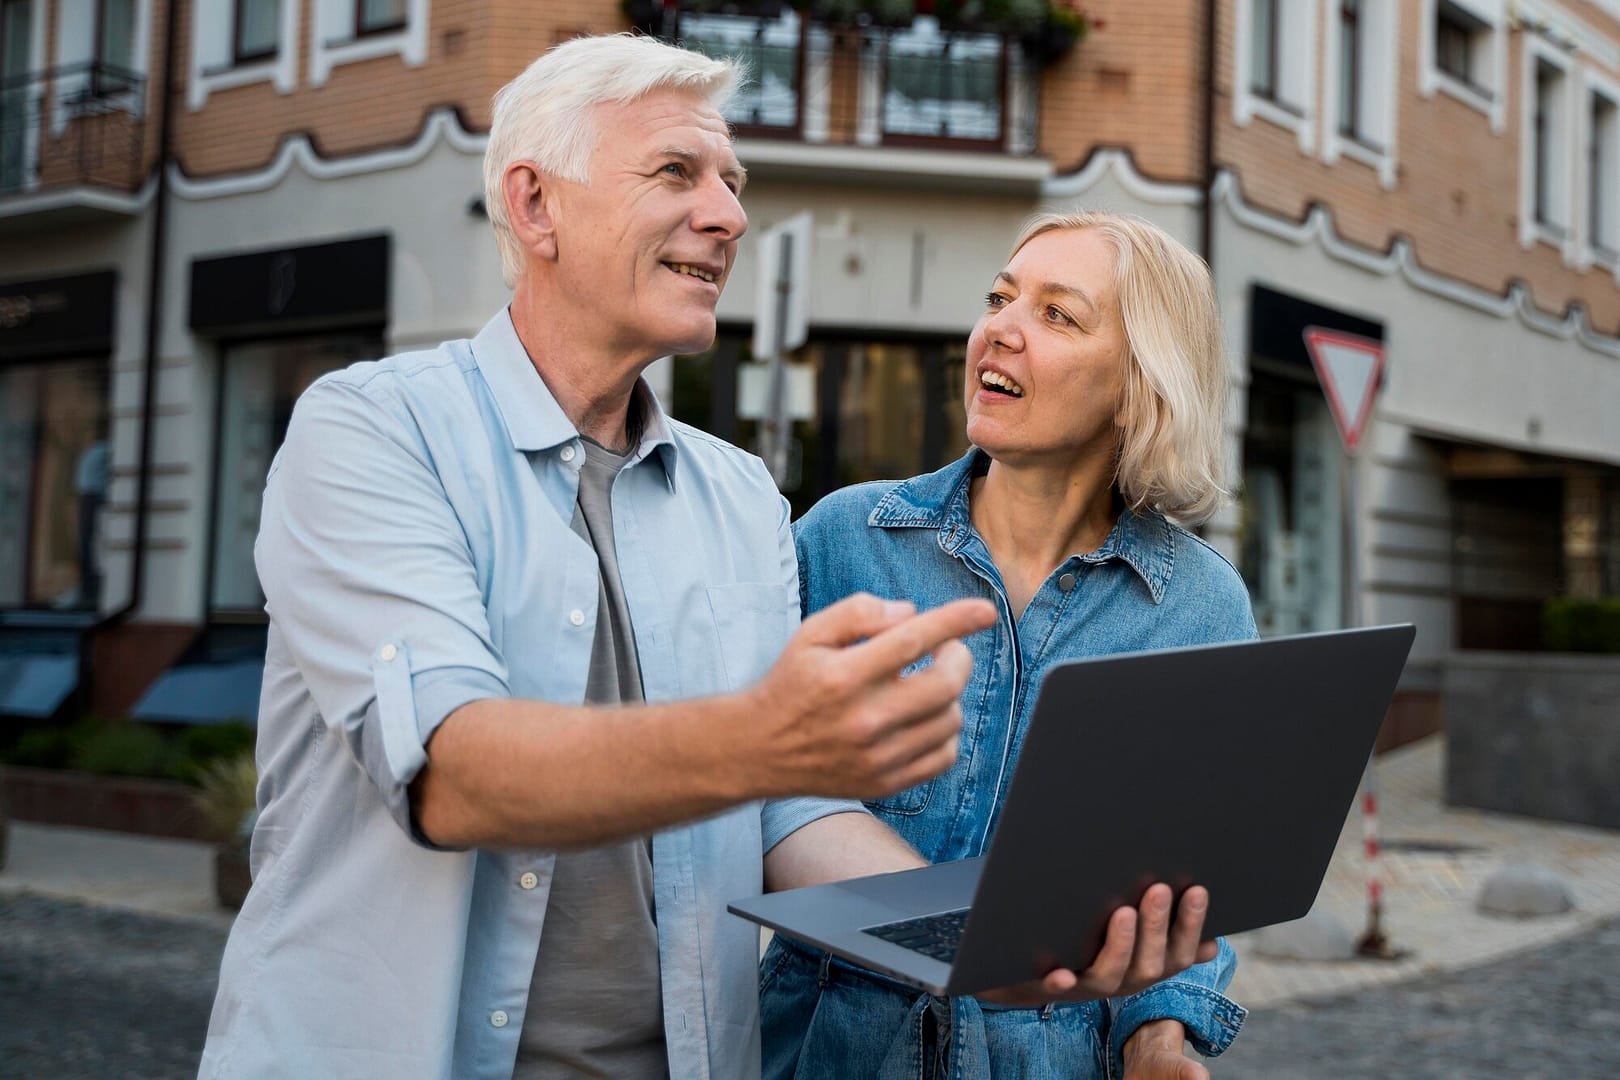 Middle aged couple holding laptop on street looking at a property